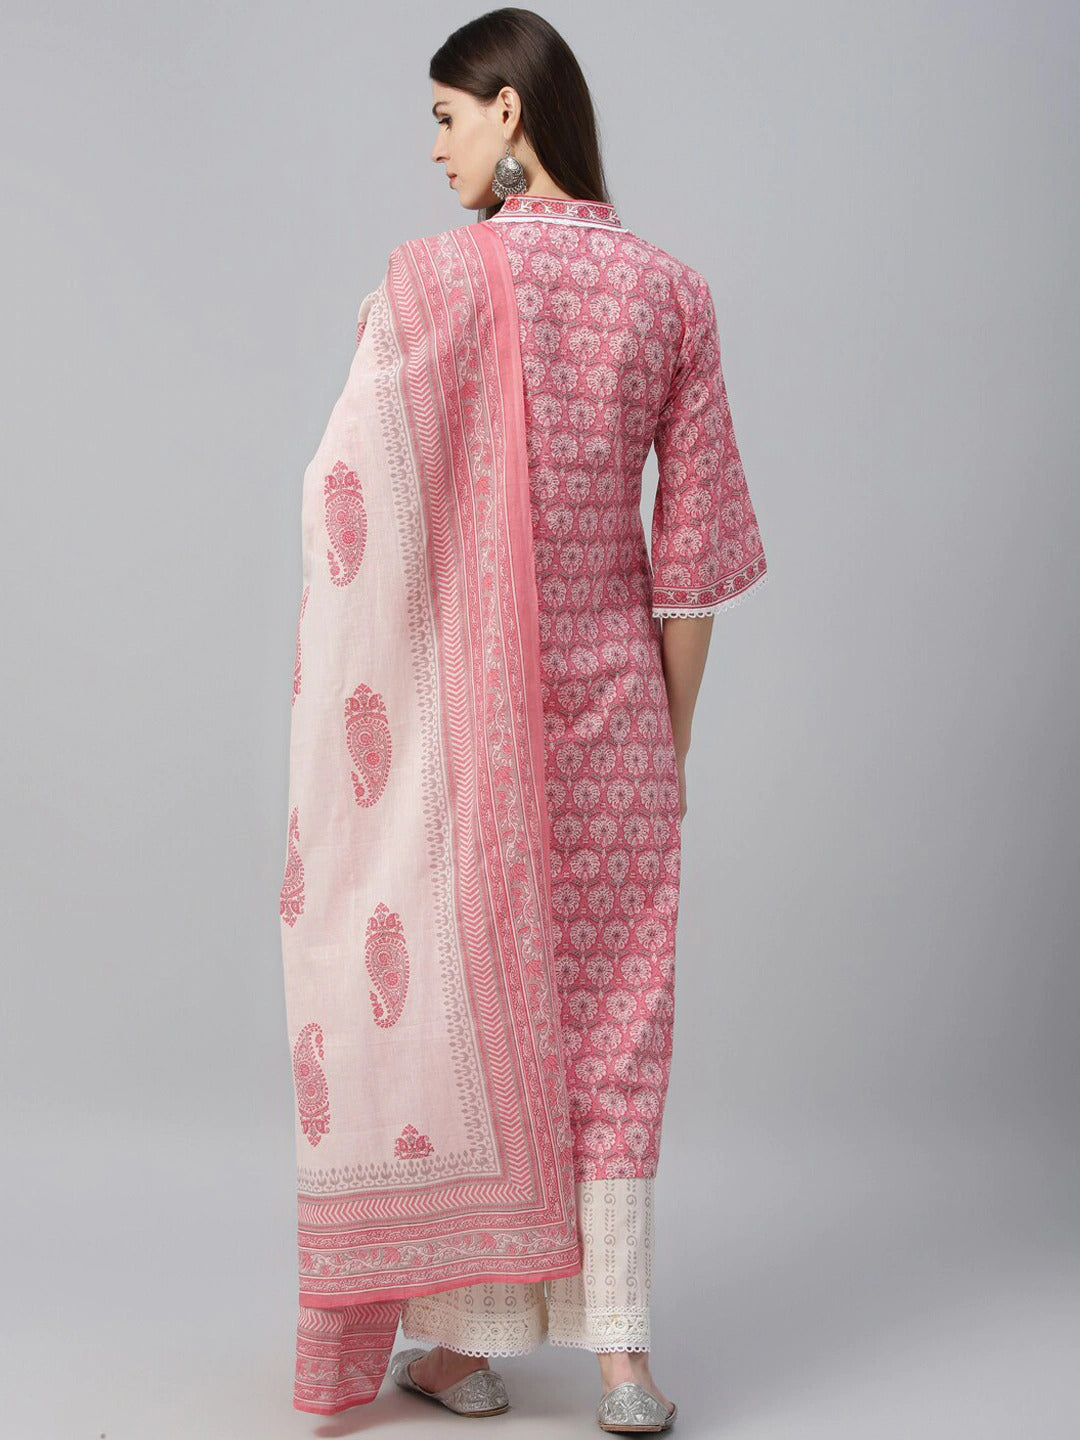 Pink Ethnic Kurta Palazzo - Indian Clothing in Denver, CO, Aurora, CO, Boulder, CO, Fort Collins, CO, Colorado Springs, CO, Parker, CO, Highlands Ranch, CO, Cherry Creek, CO, Centennial, CO, and Longmont, CO. Nationwide shipping USA - India Fashion X